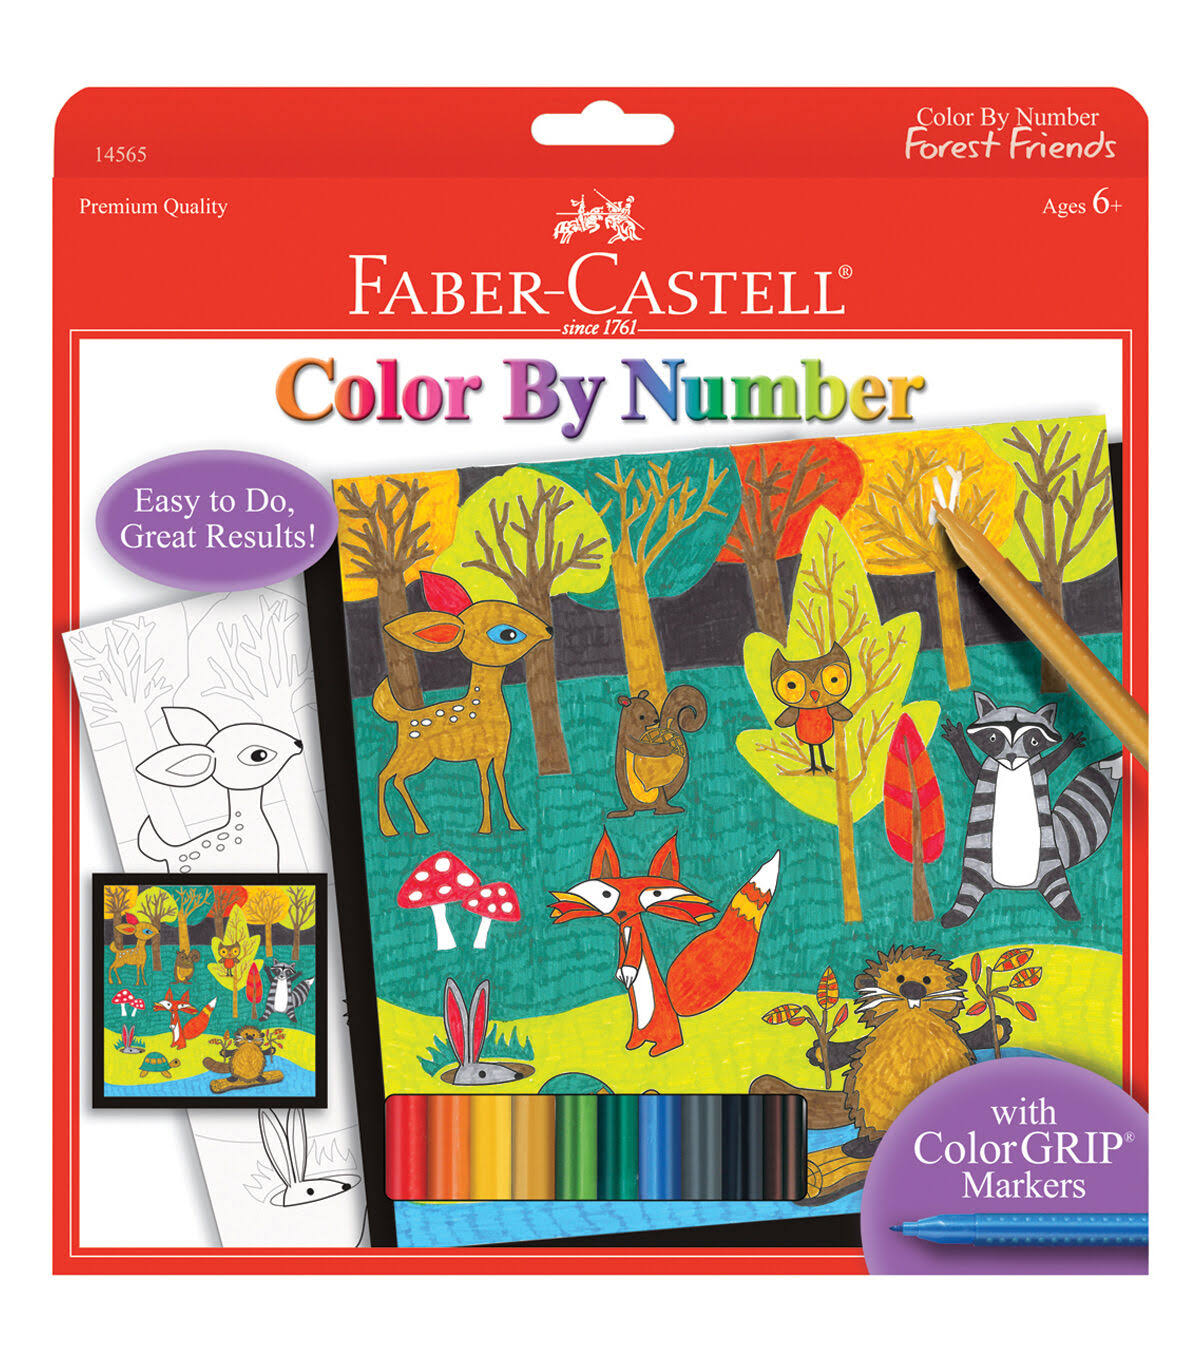 Faber Castell Color By Number Kit - Forest Friends